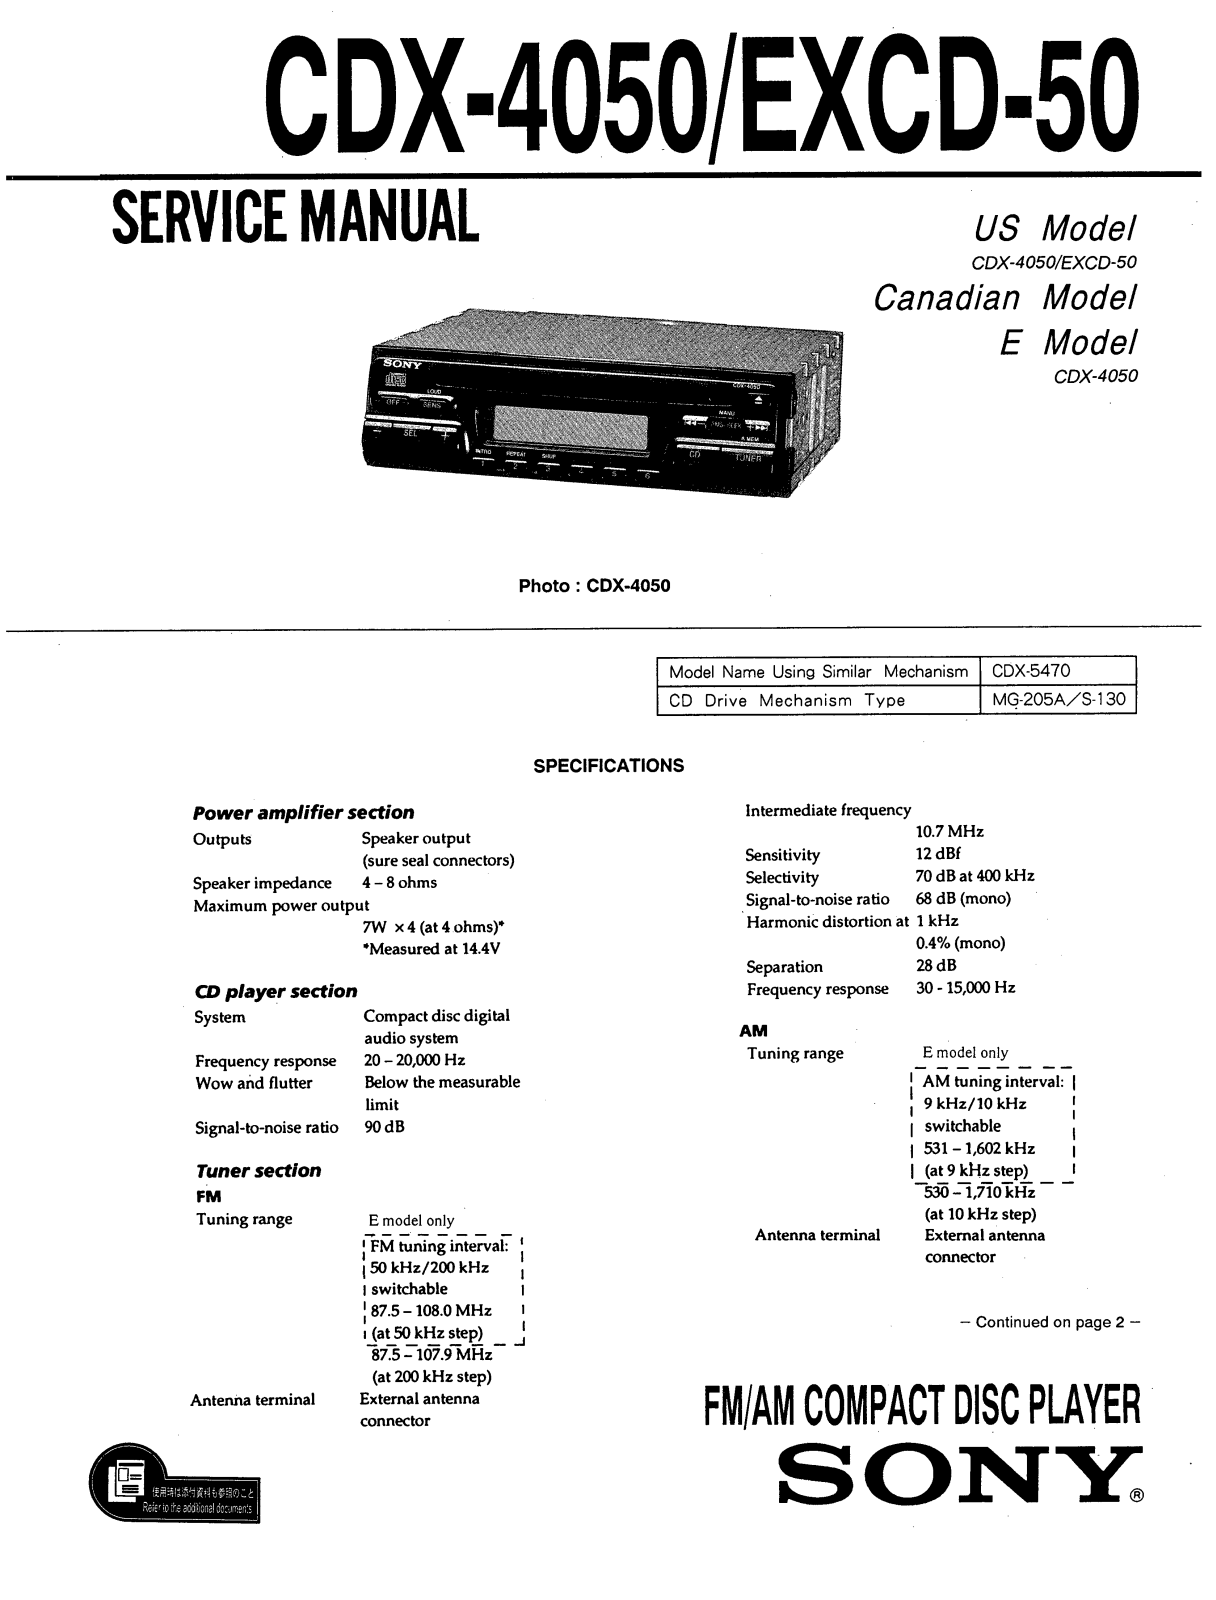 Sony EXCD-50, CDX-4050 Service manual